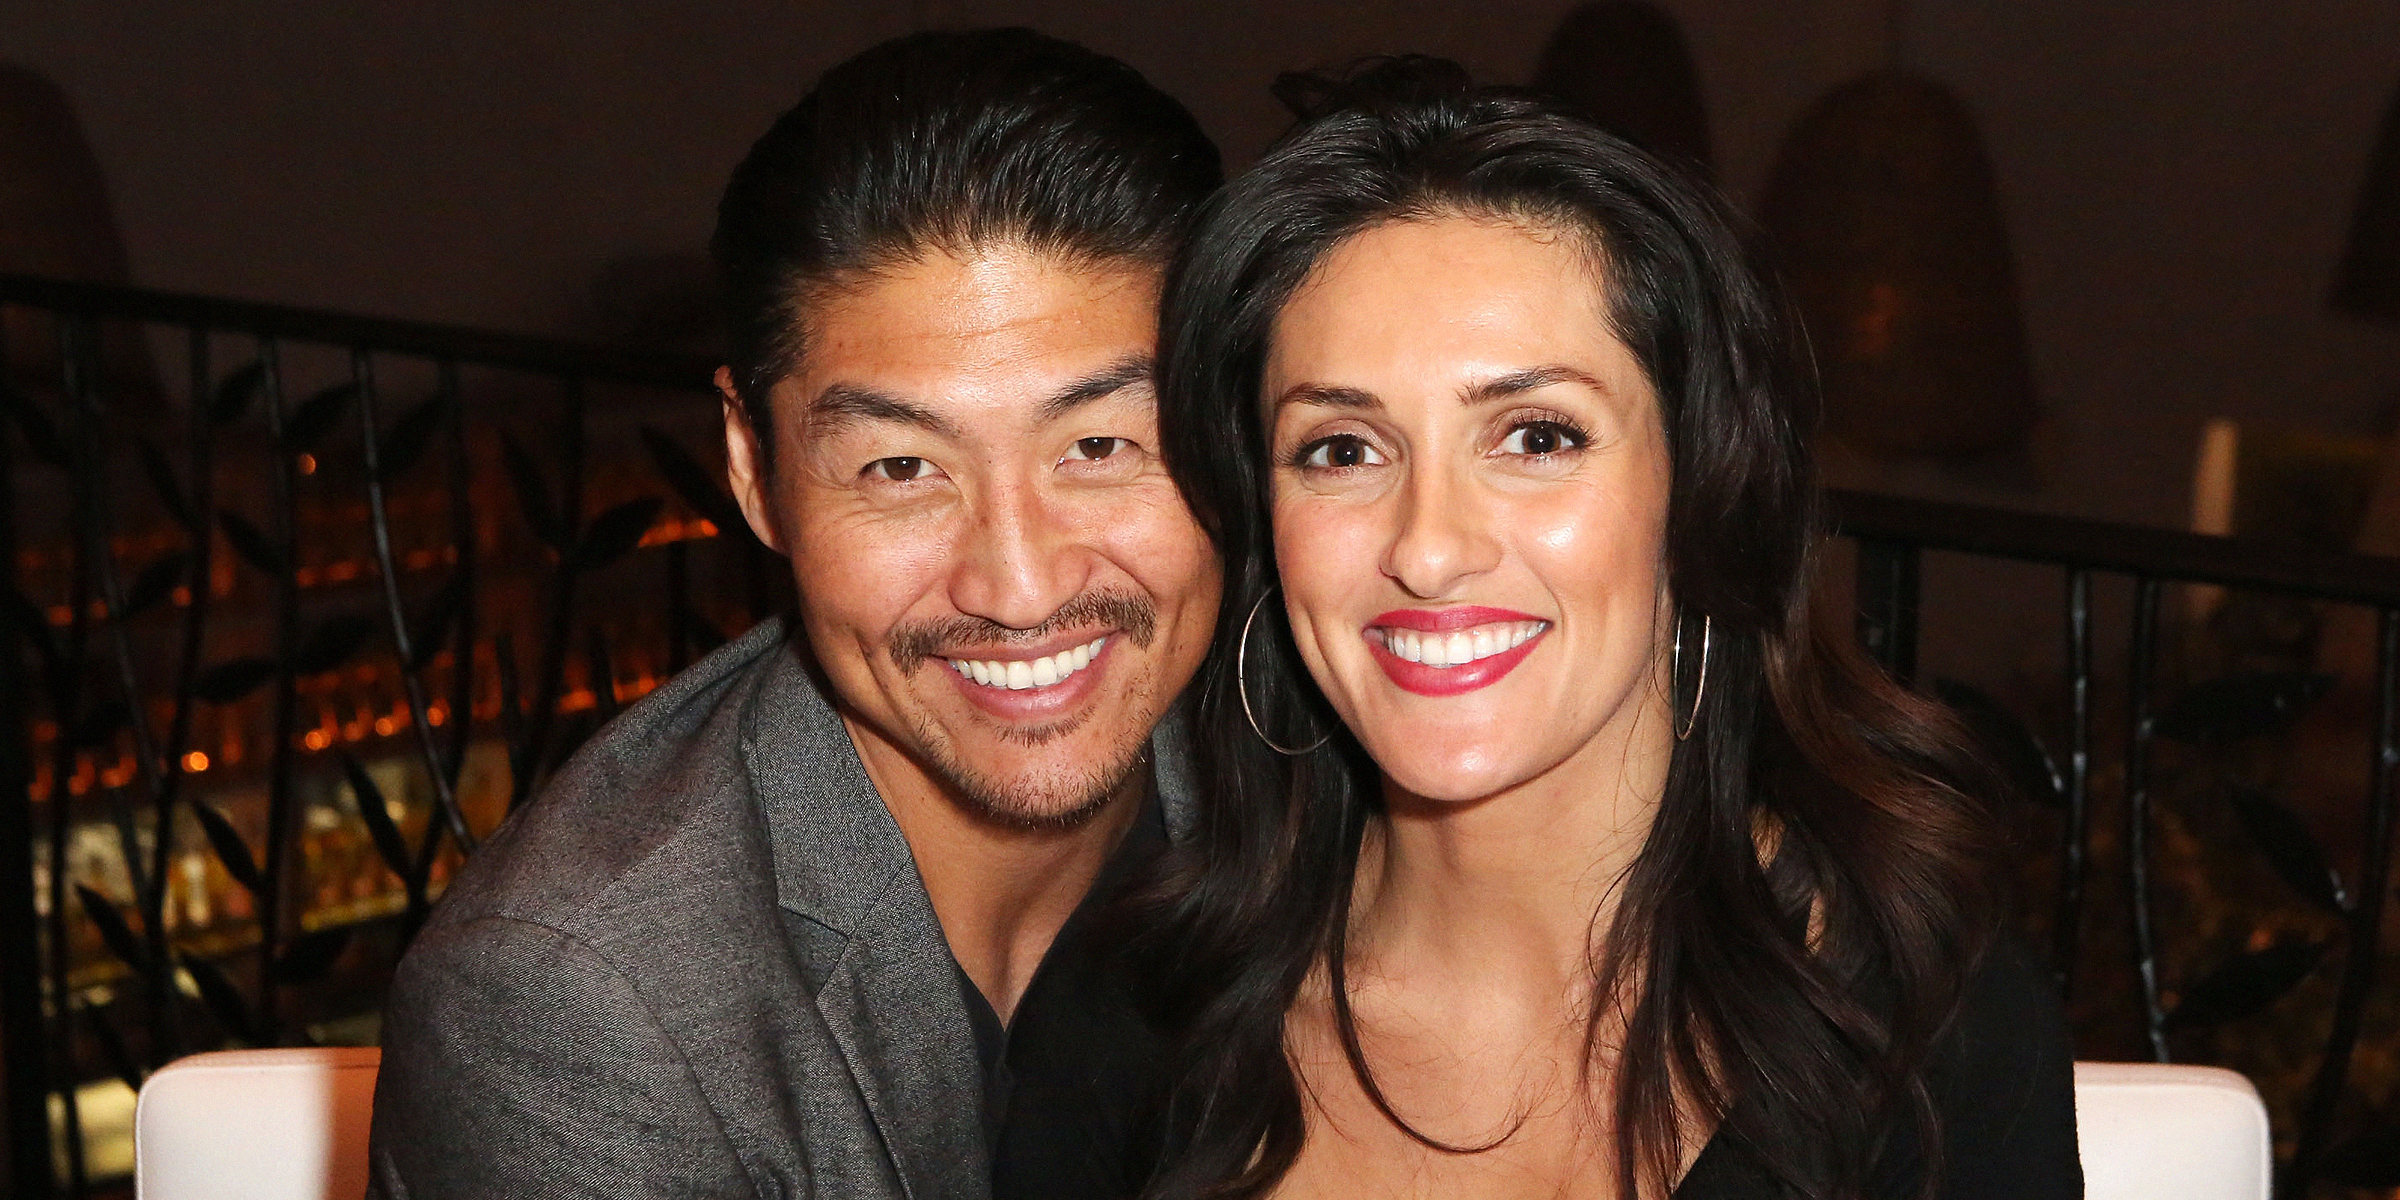 Brian Tee and Mirelly Taylor. | Source: Getty Images